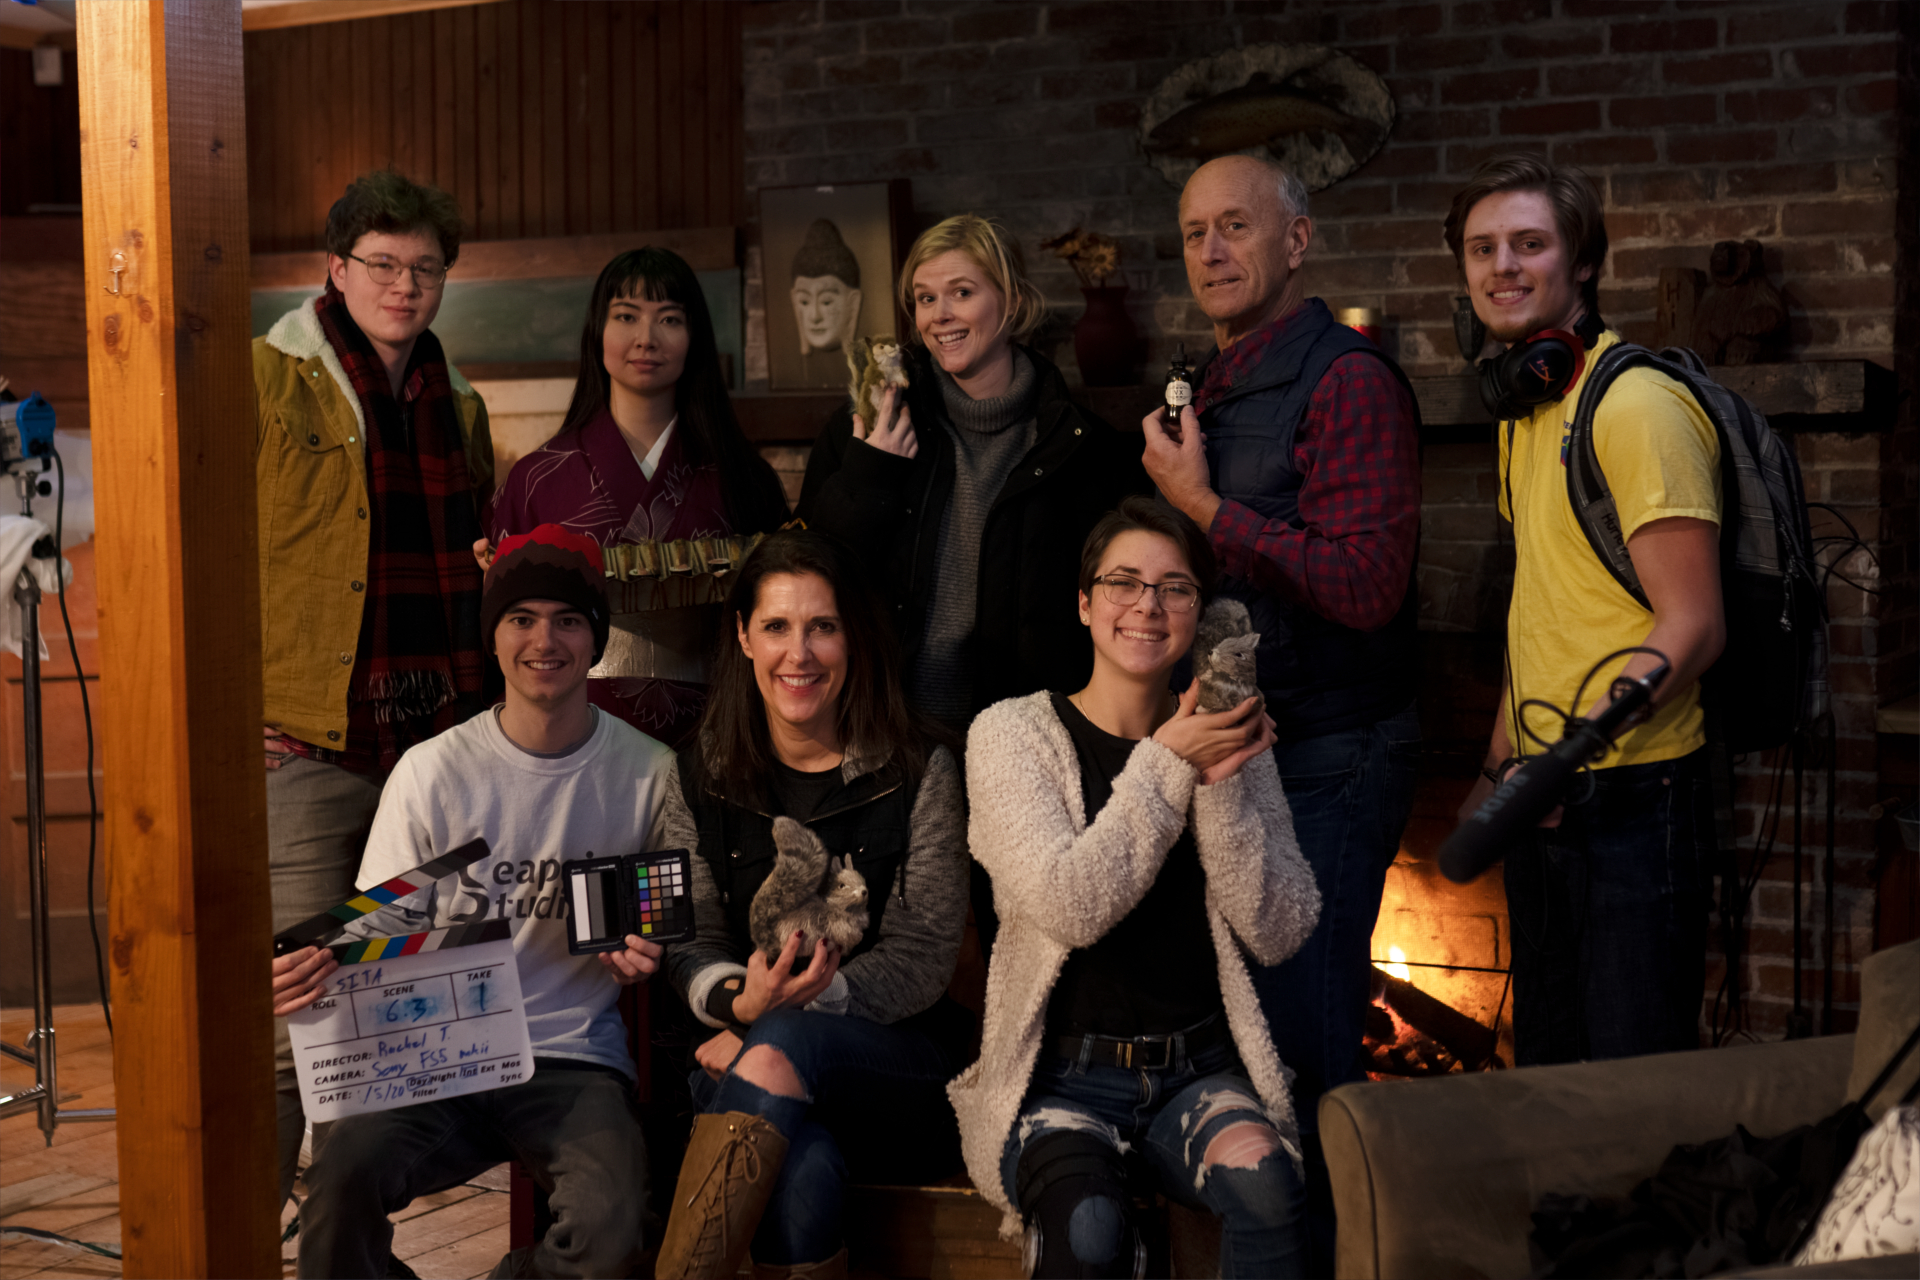 Wrap photo on set of award winning short film The Squirrels in the Attic